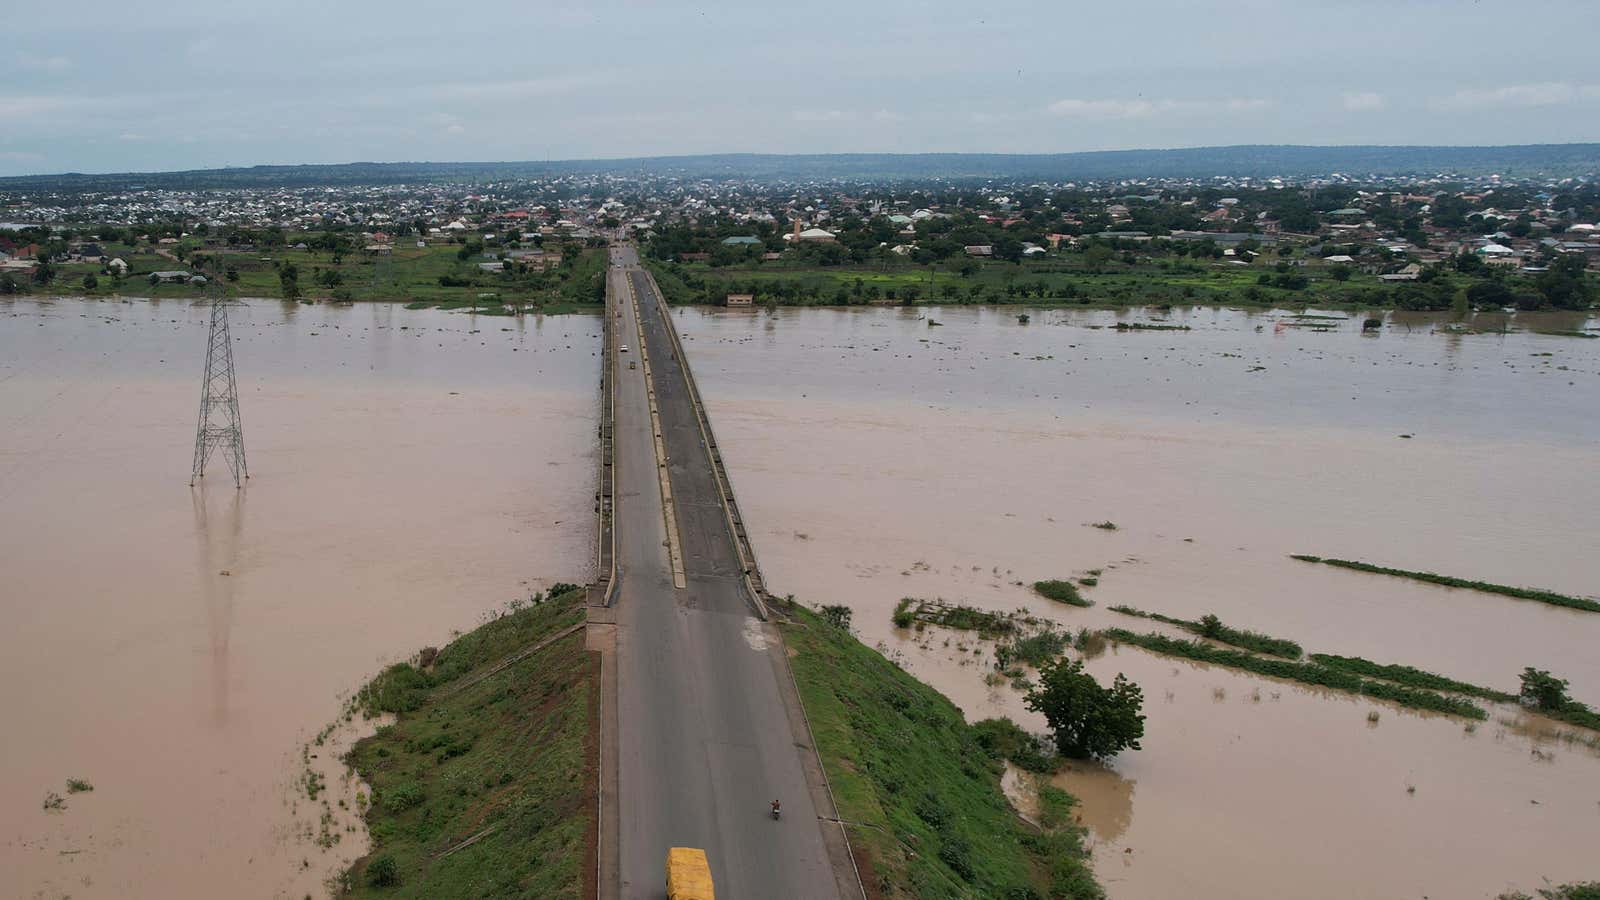 Global heating will cause more destructive weather events, like the 2022 floods in Nigeria.